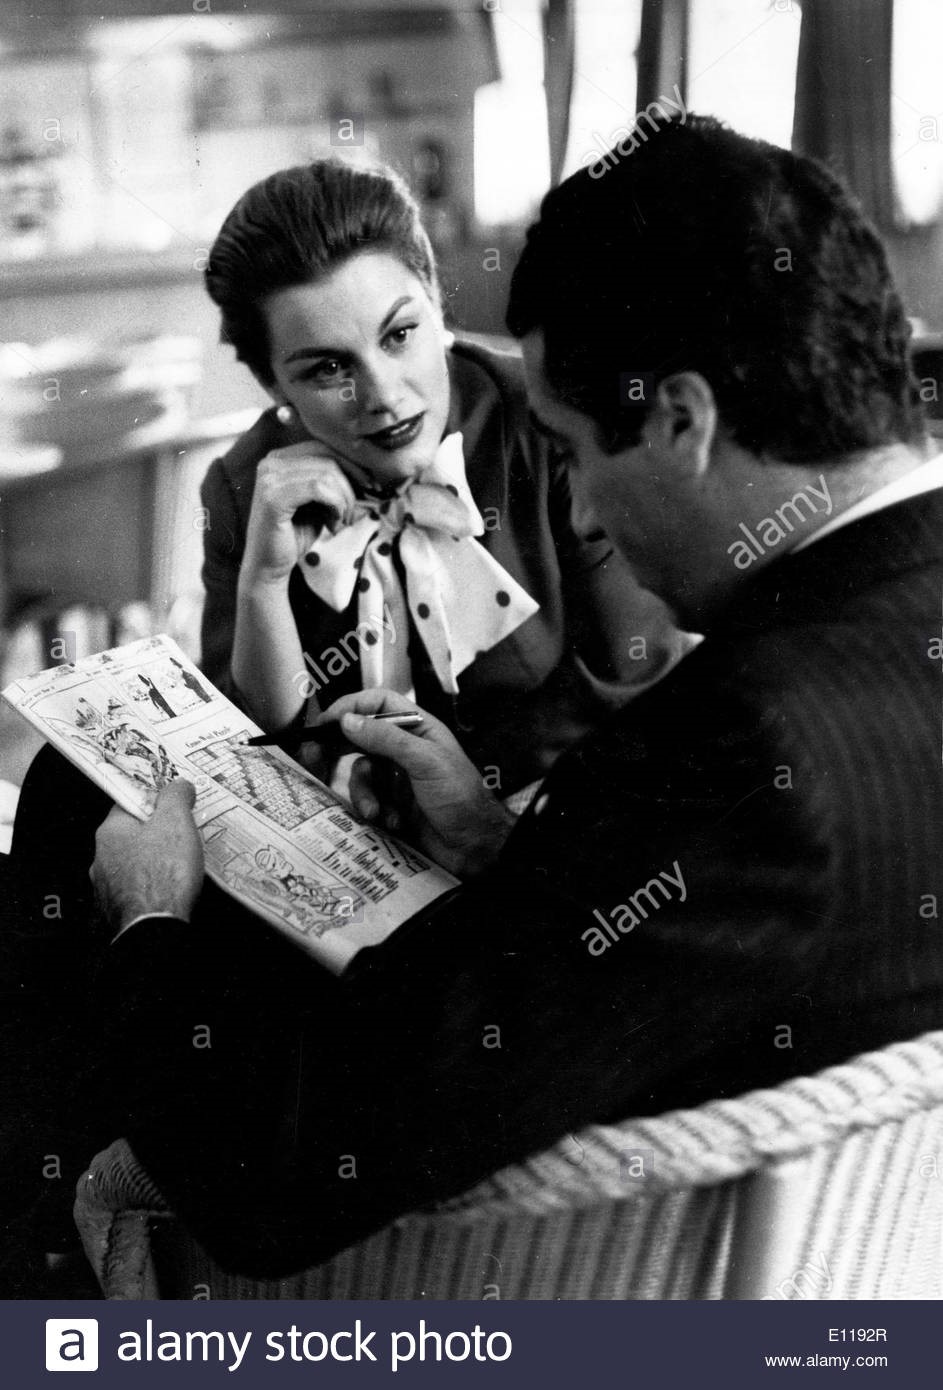 April 15, 1957, London, England, U.K. Actress Linda Christian and marquis de Portago do puzzles in the London airport while they wait for their flight. 